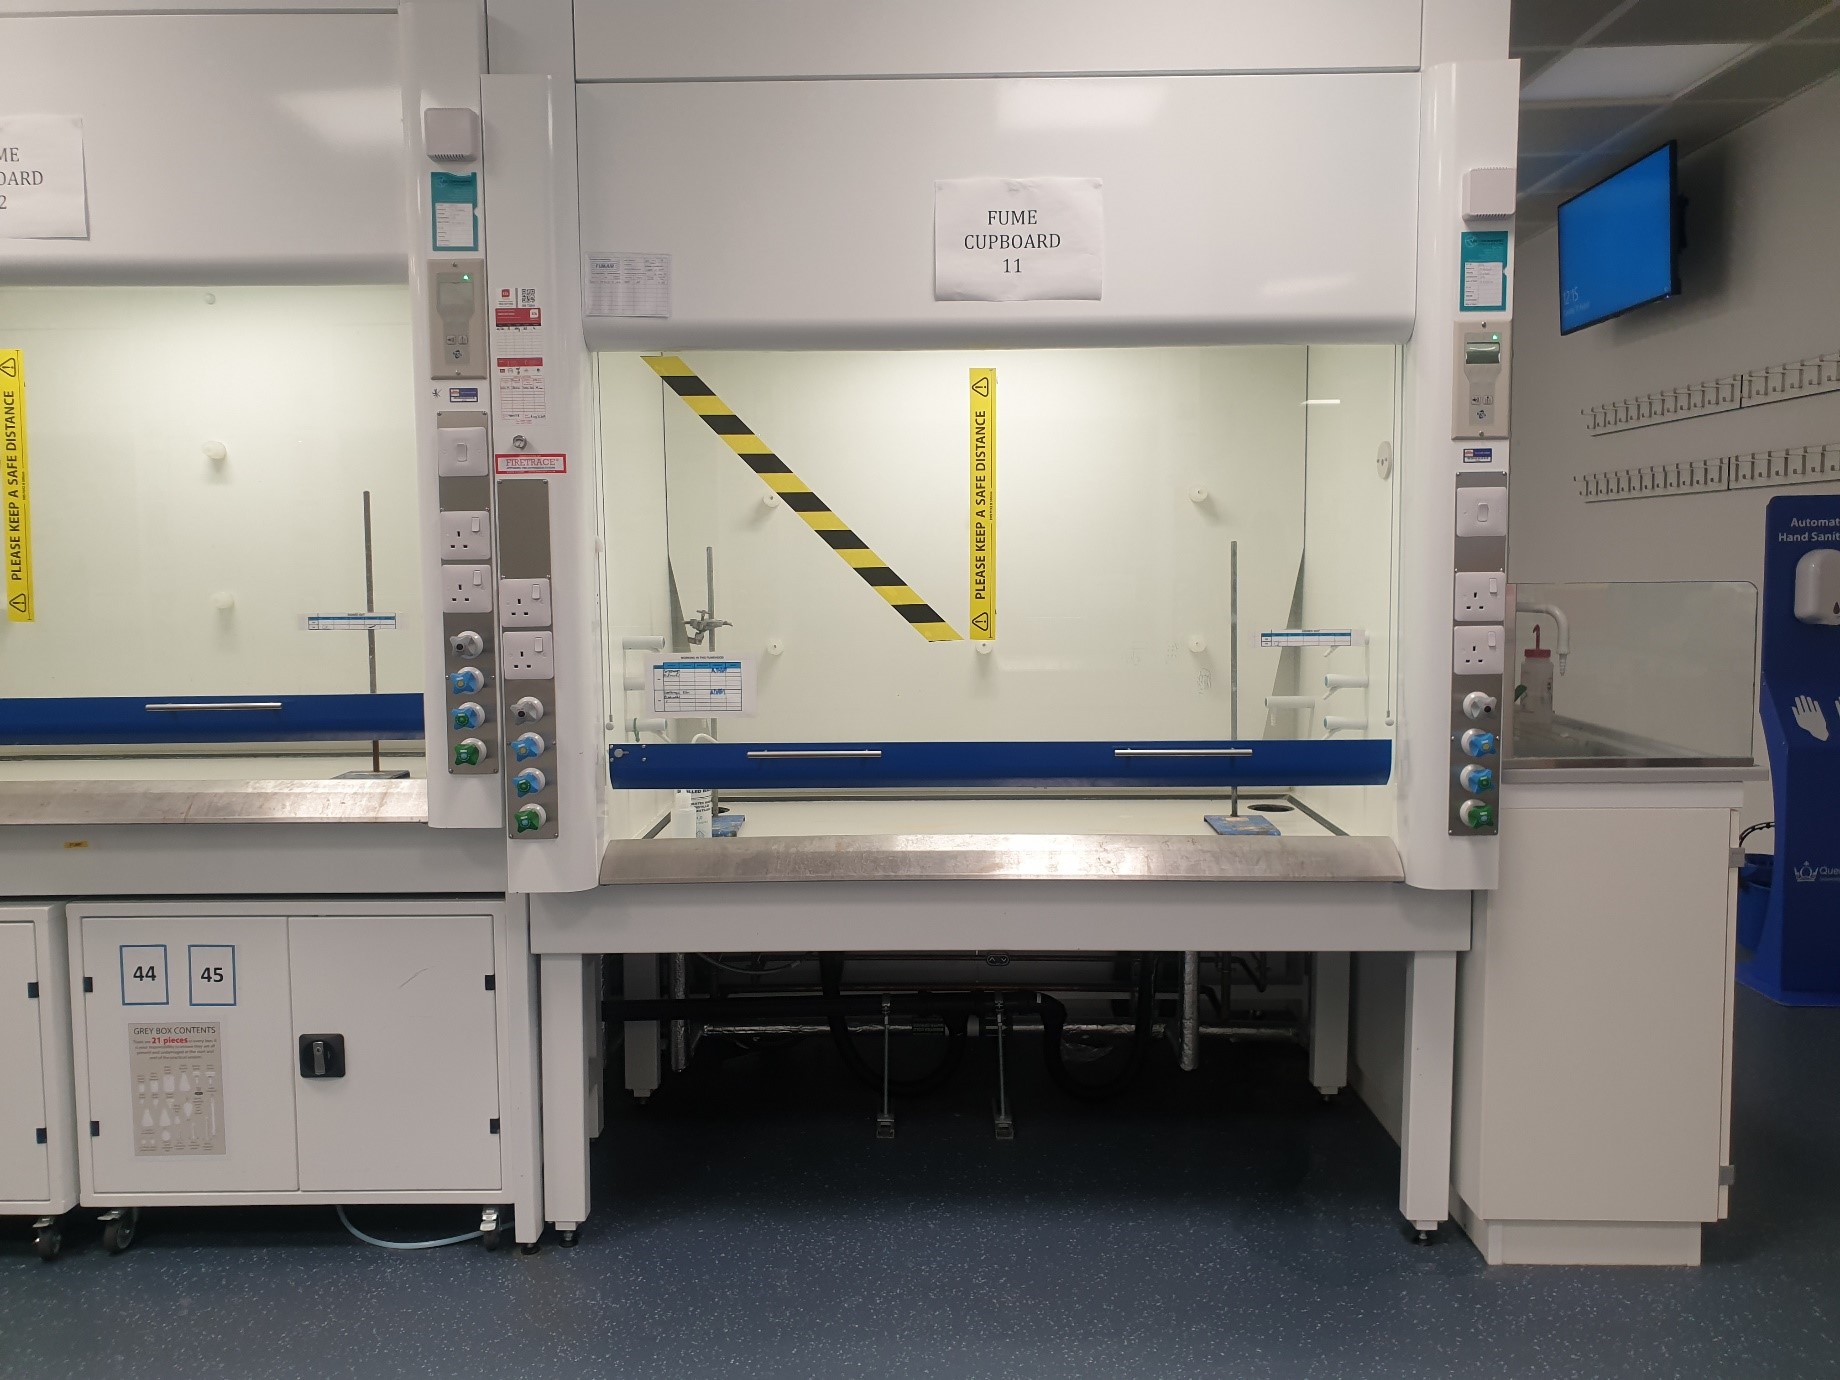 An adaptable Fume Cupboard in the Chemistry Undergraduate Teaching Lab